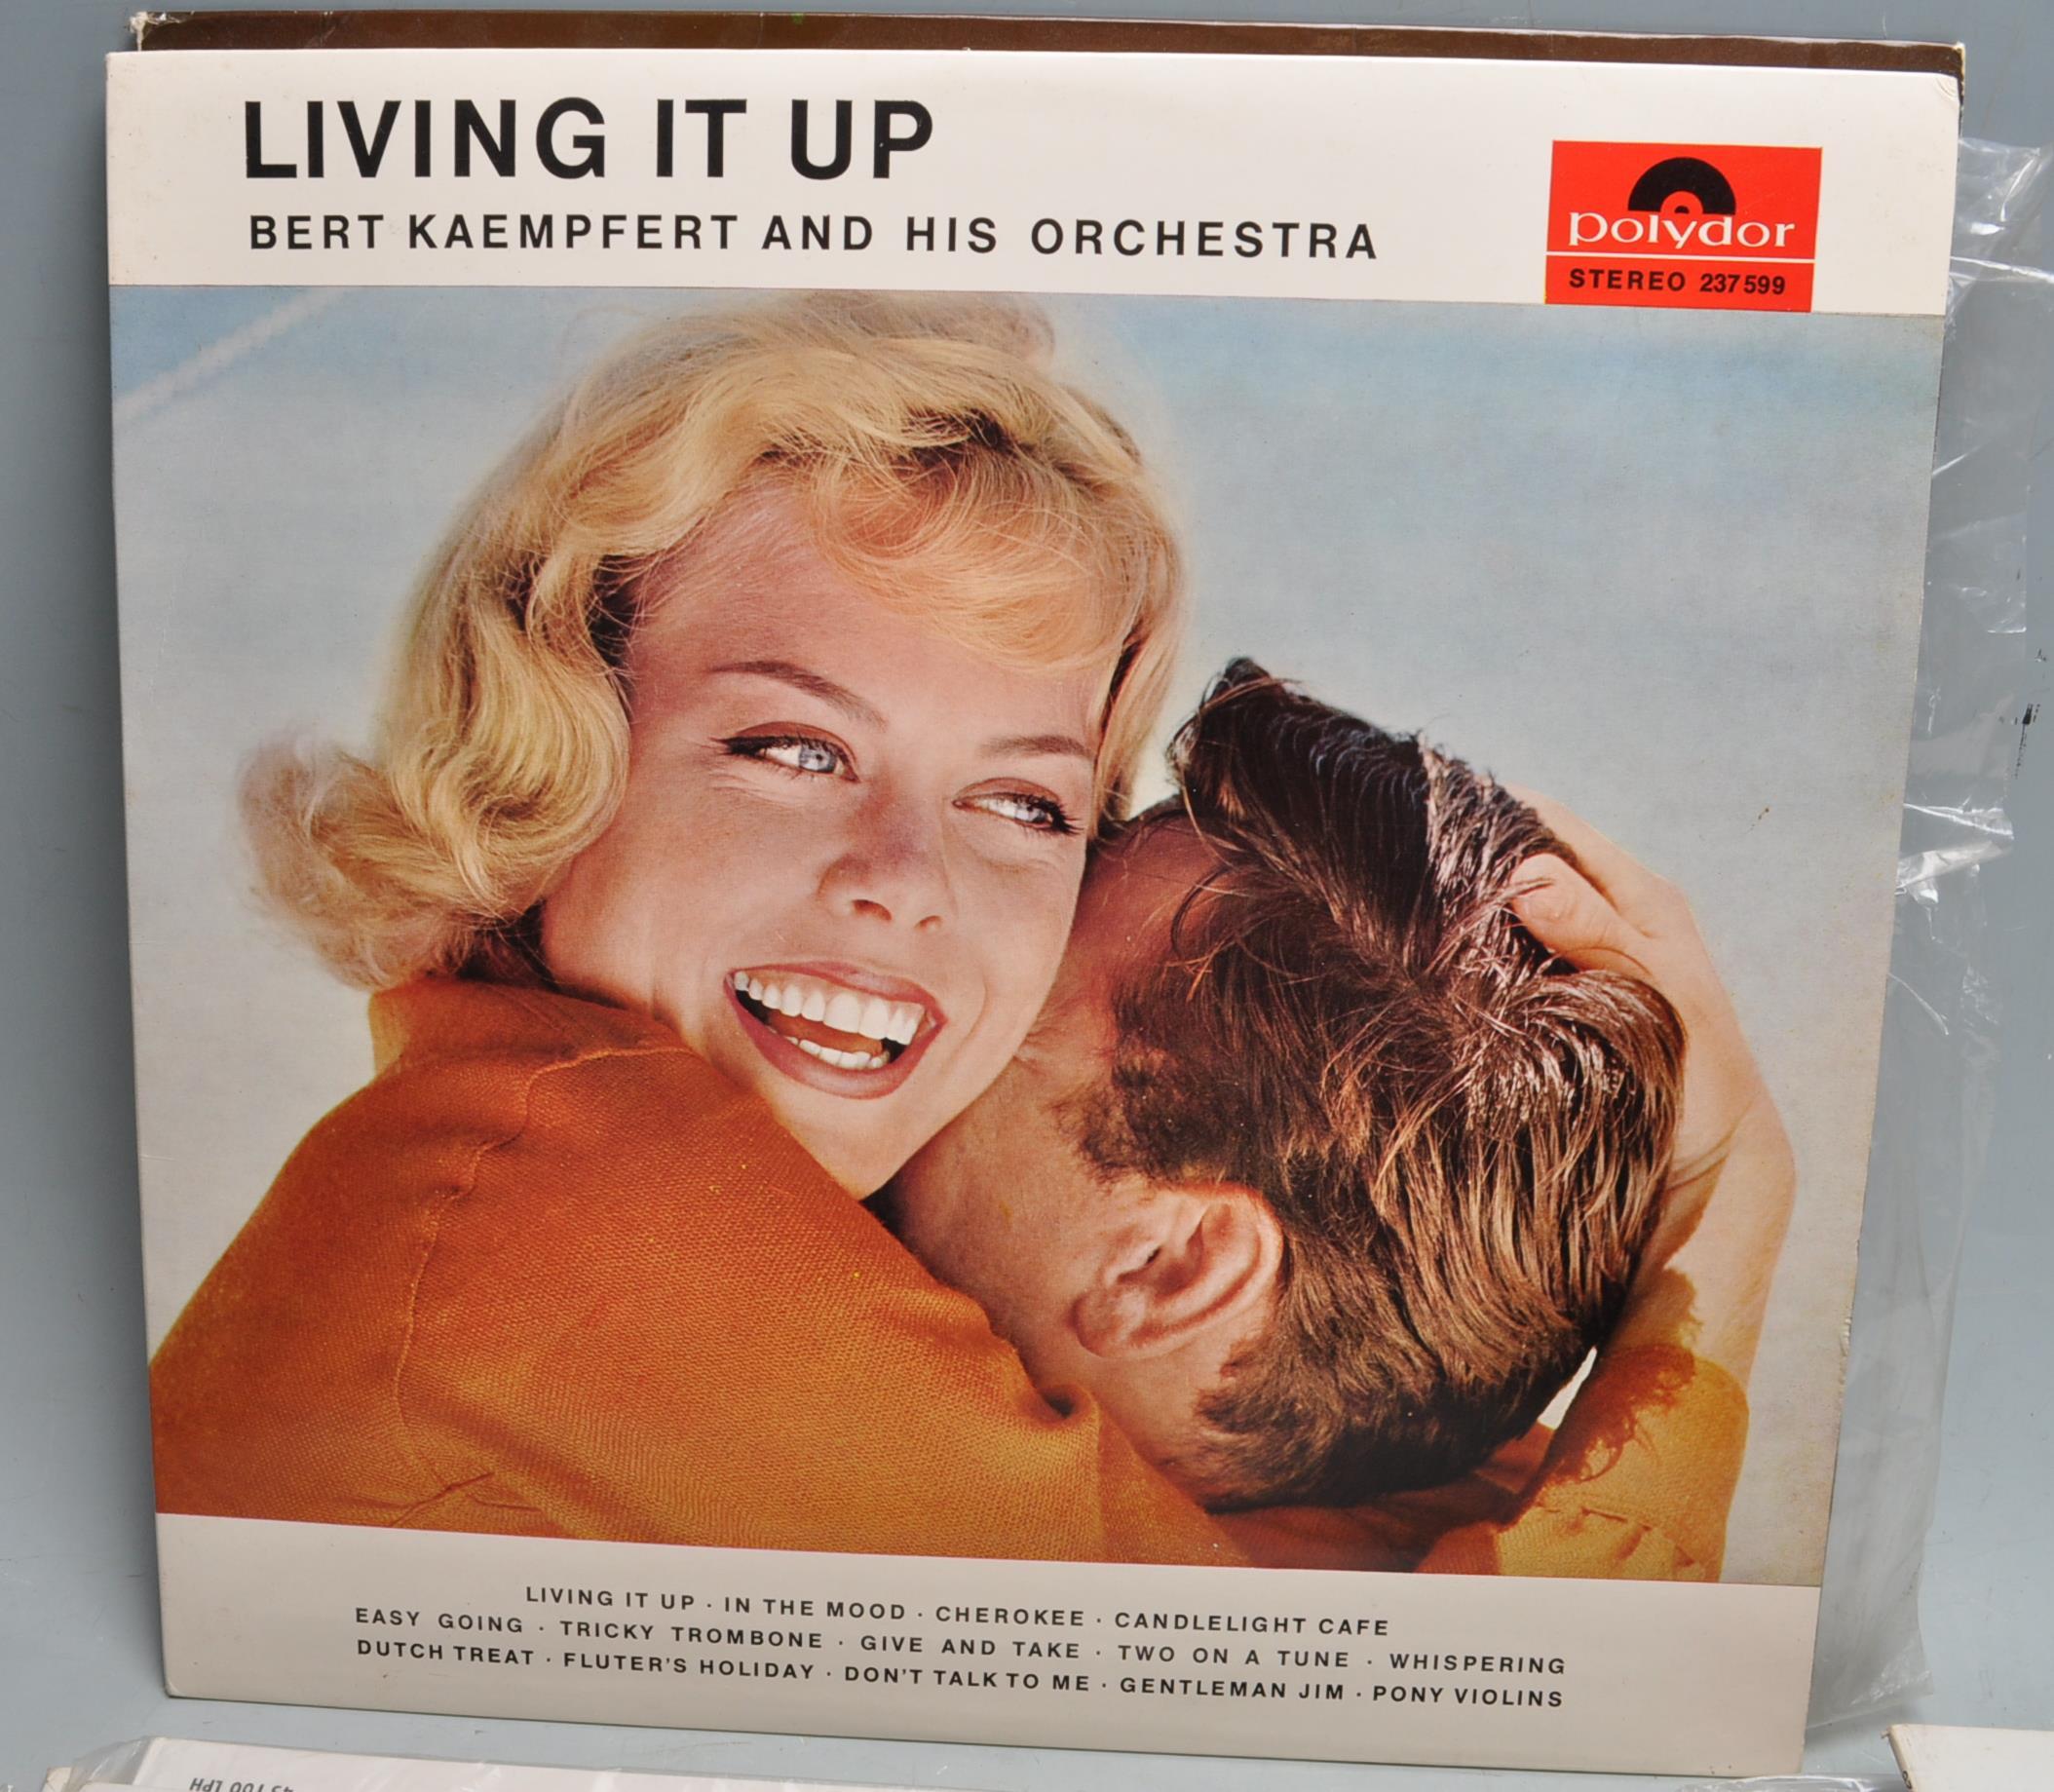 COLLECTION OF VINTAGE VINYL LP RECORDS - Image 7 of 7